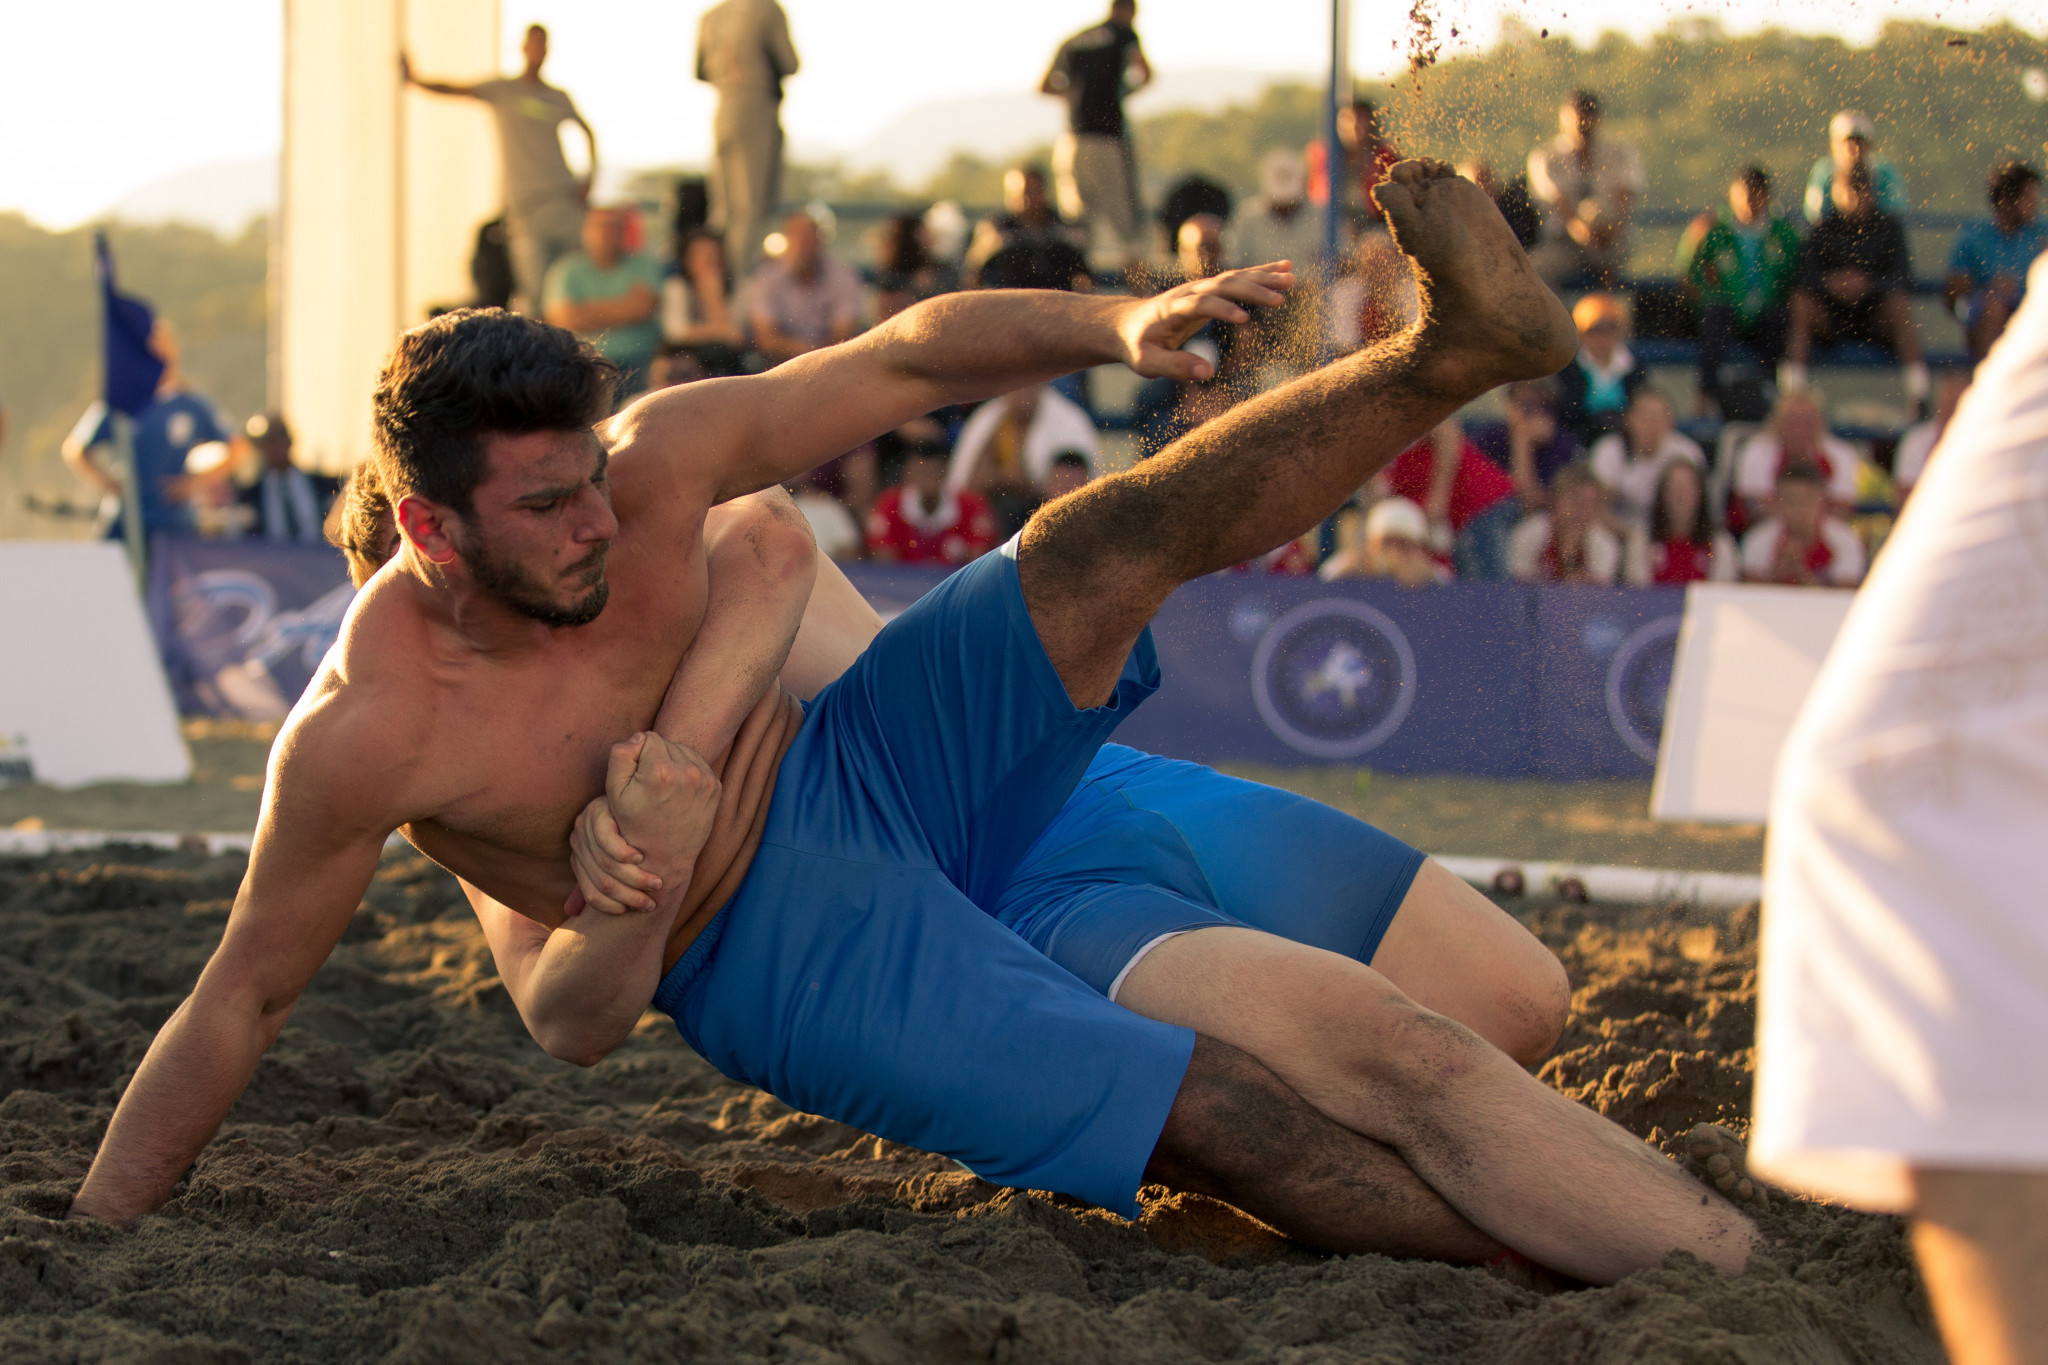 UWW launch Beach Wrestling World Series to promote inclusion of discipline at multi-sport events